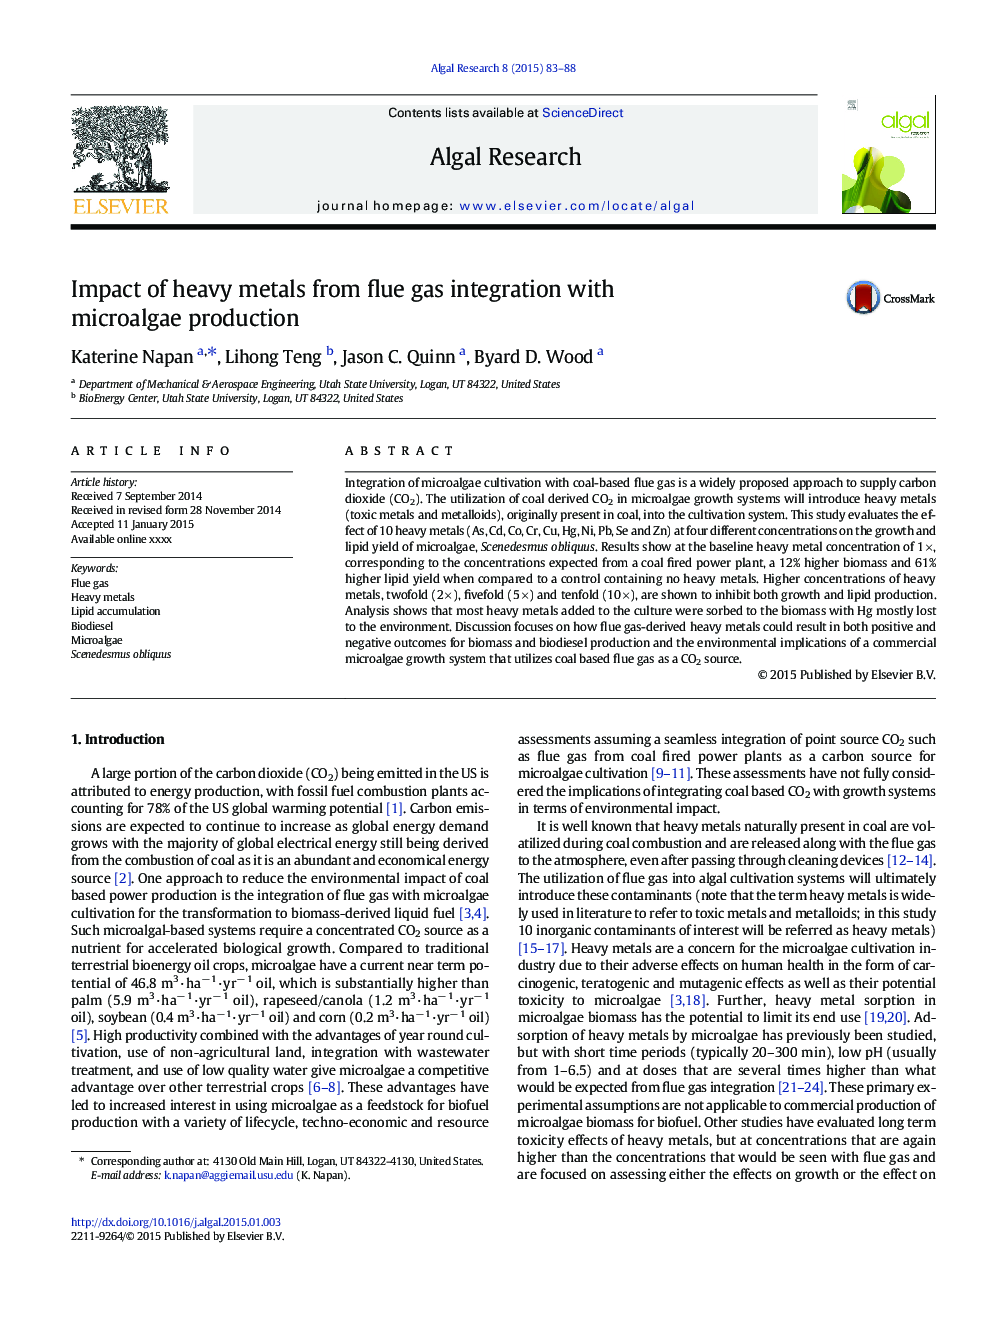 Impact of heavy metals from flue gas integration with microalgae production